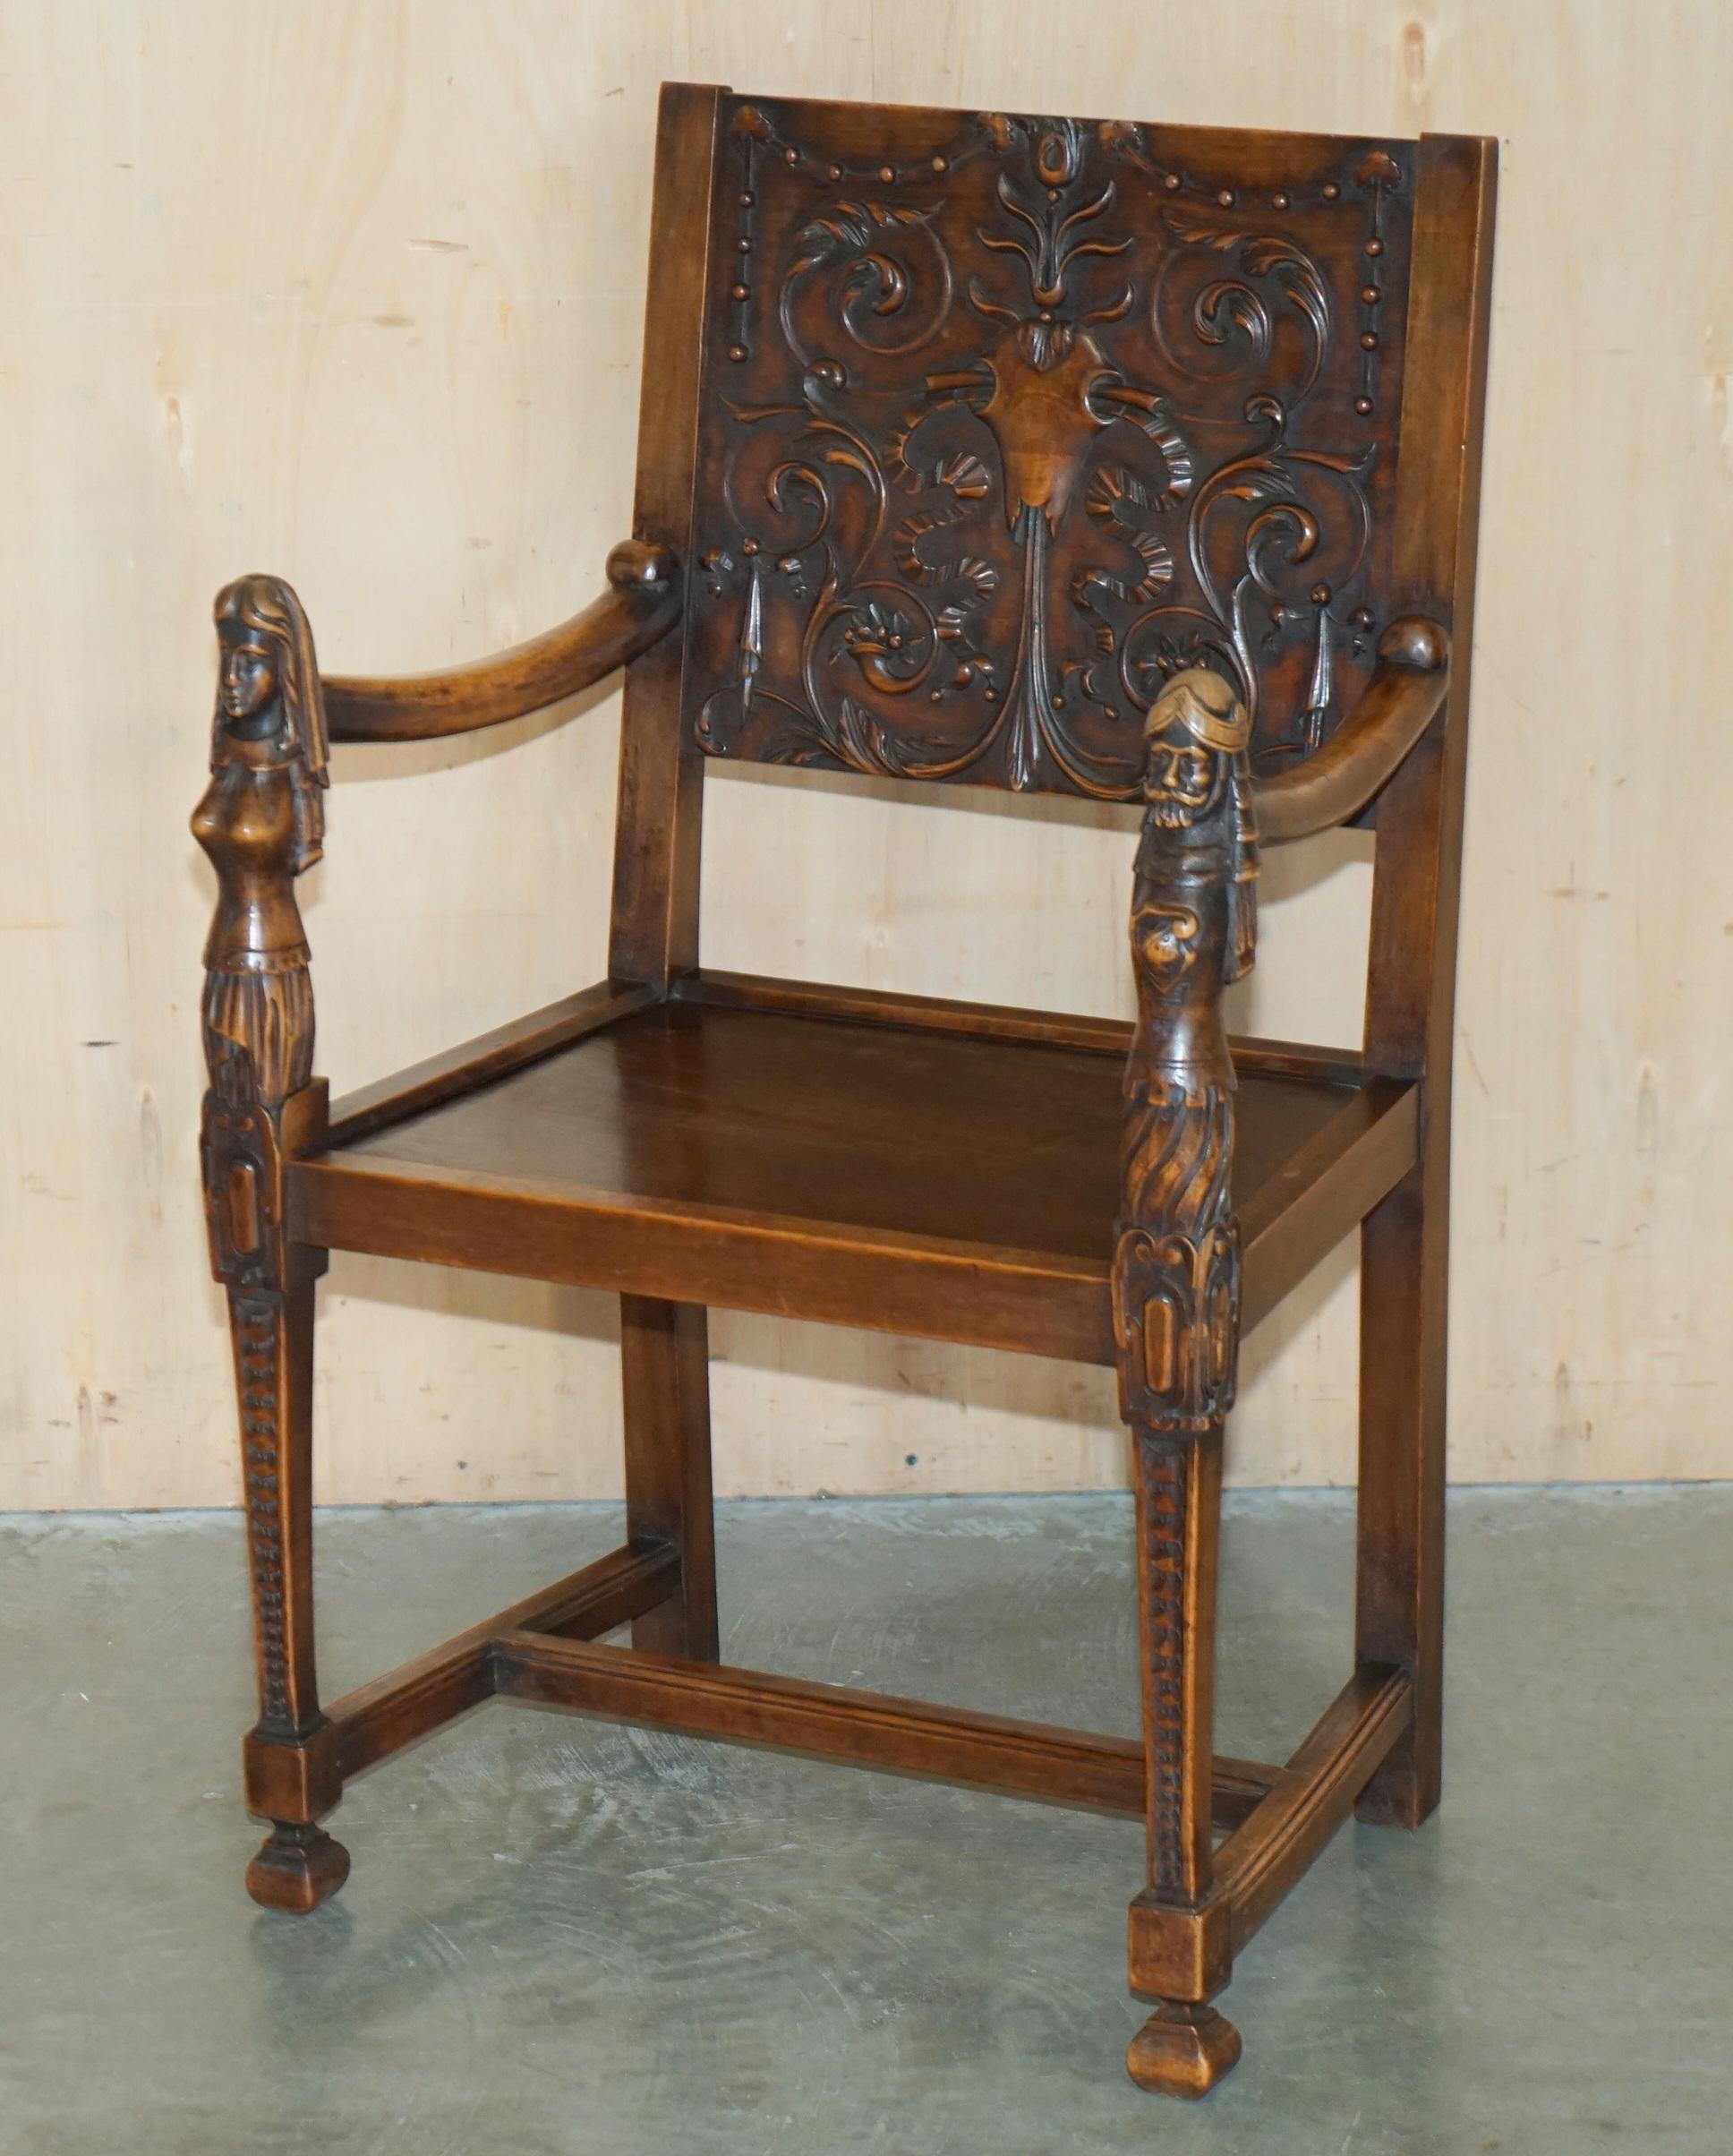 PAIR OF ORNATELY CARVED NEO-GOTHIC SOLiD WALNUT 19TH CENTURY CEREMONY ARMCHAIRS For Sale 4